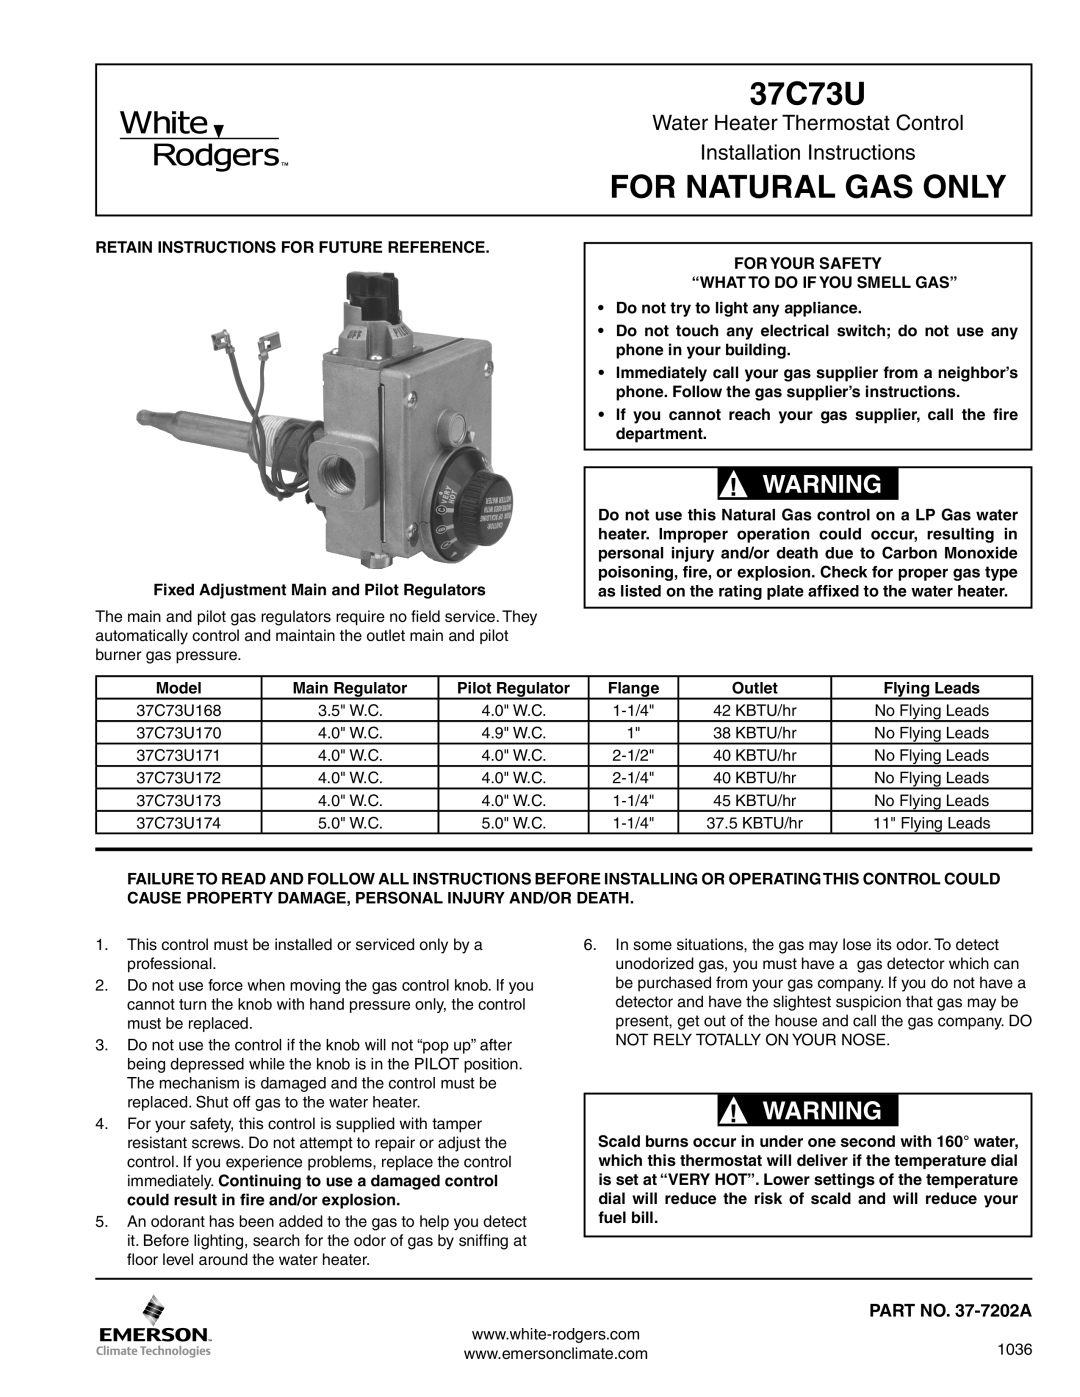 White Rodgers 37C73U installation instructions PART NO. 37-7202A, For Natural Gas Only 